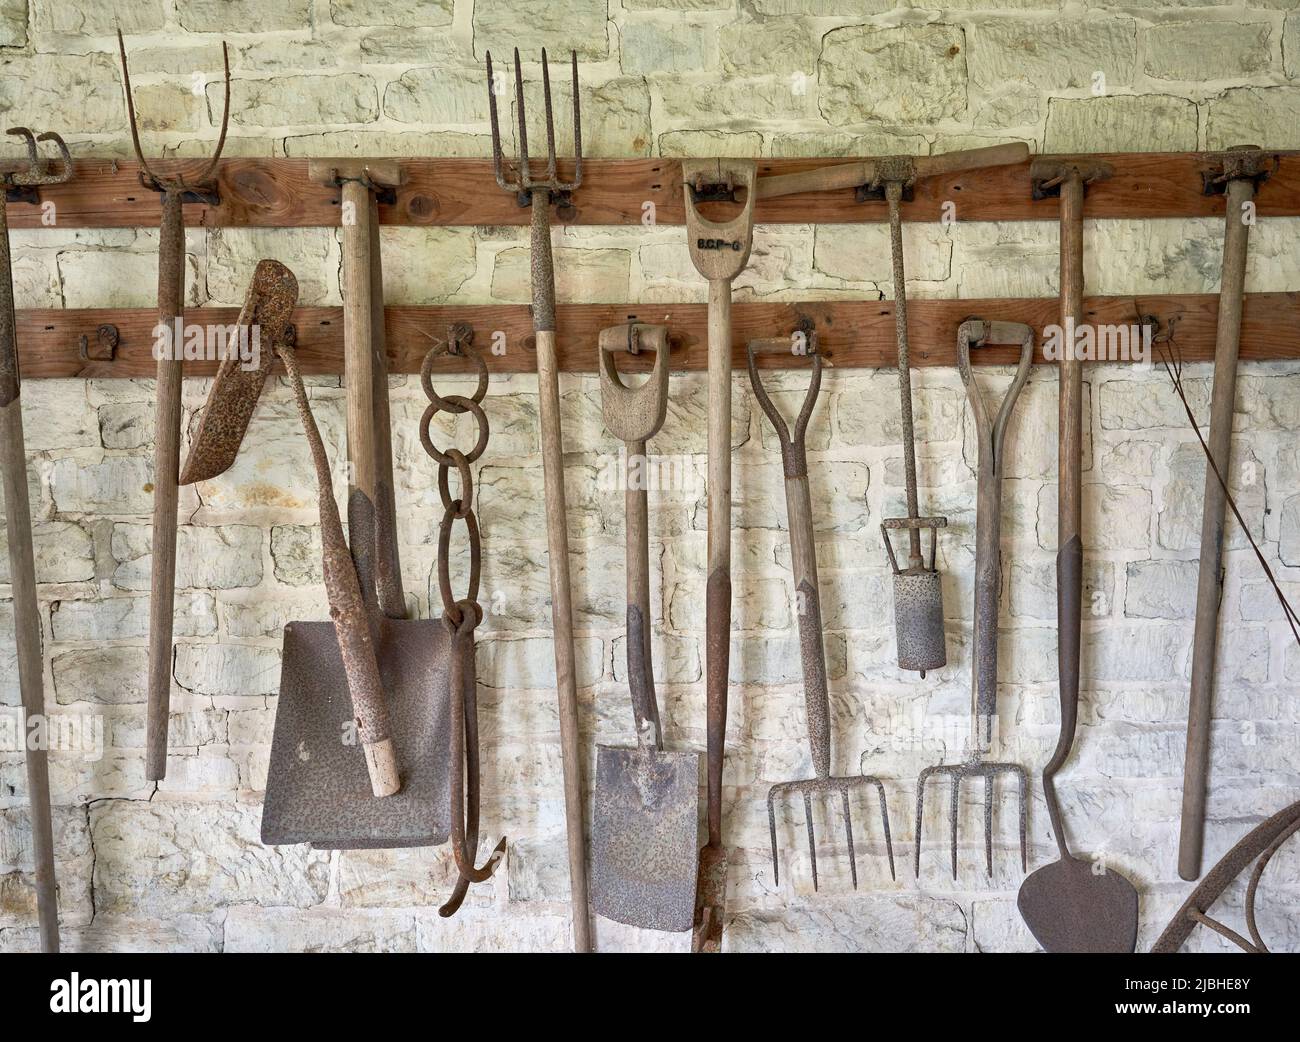 Vintage garden tools hanging on a whitewashed wall Stock Photo